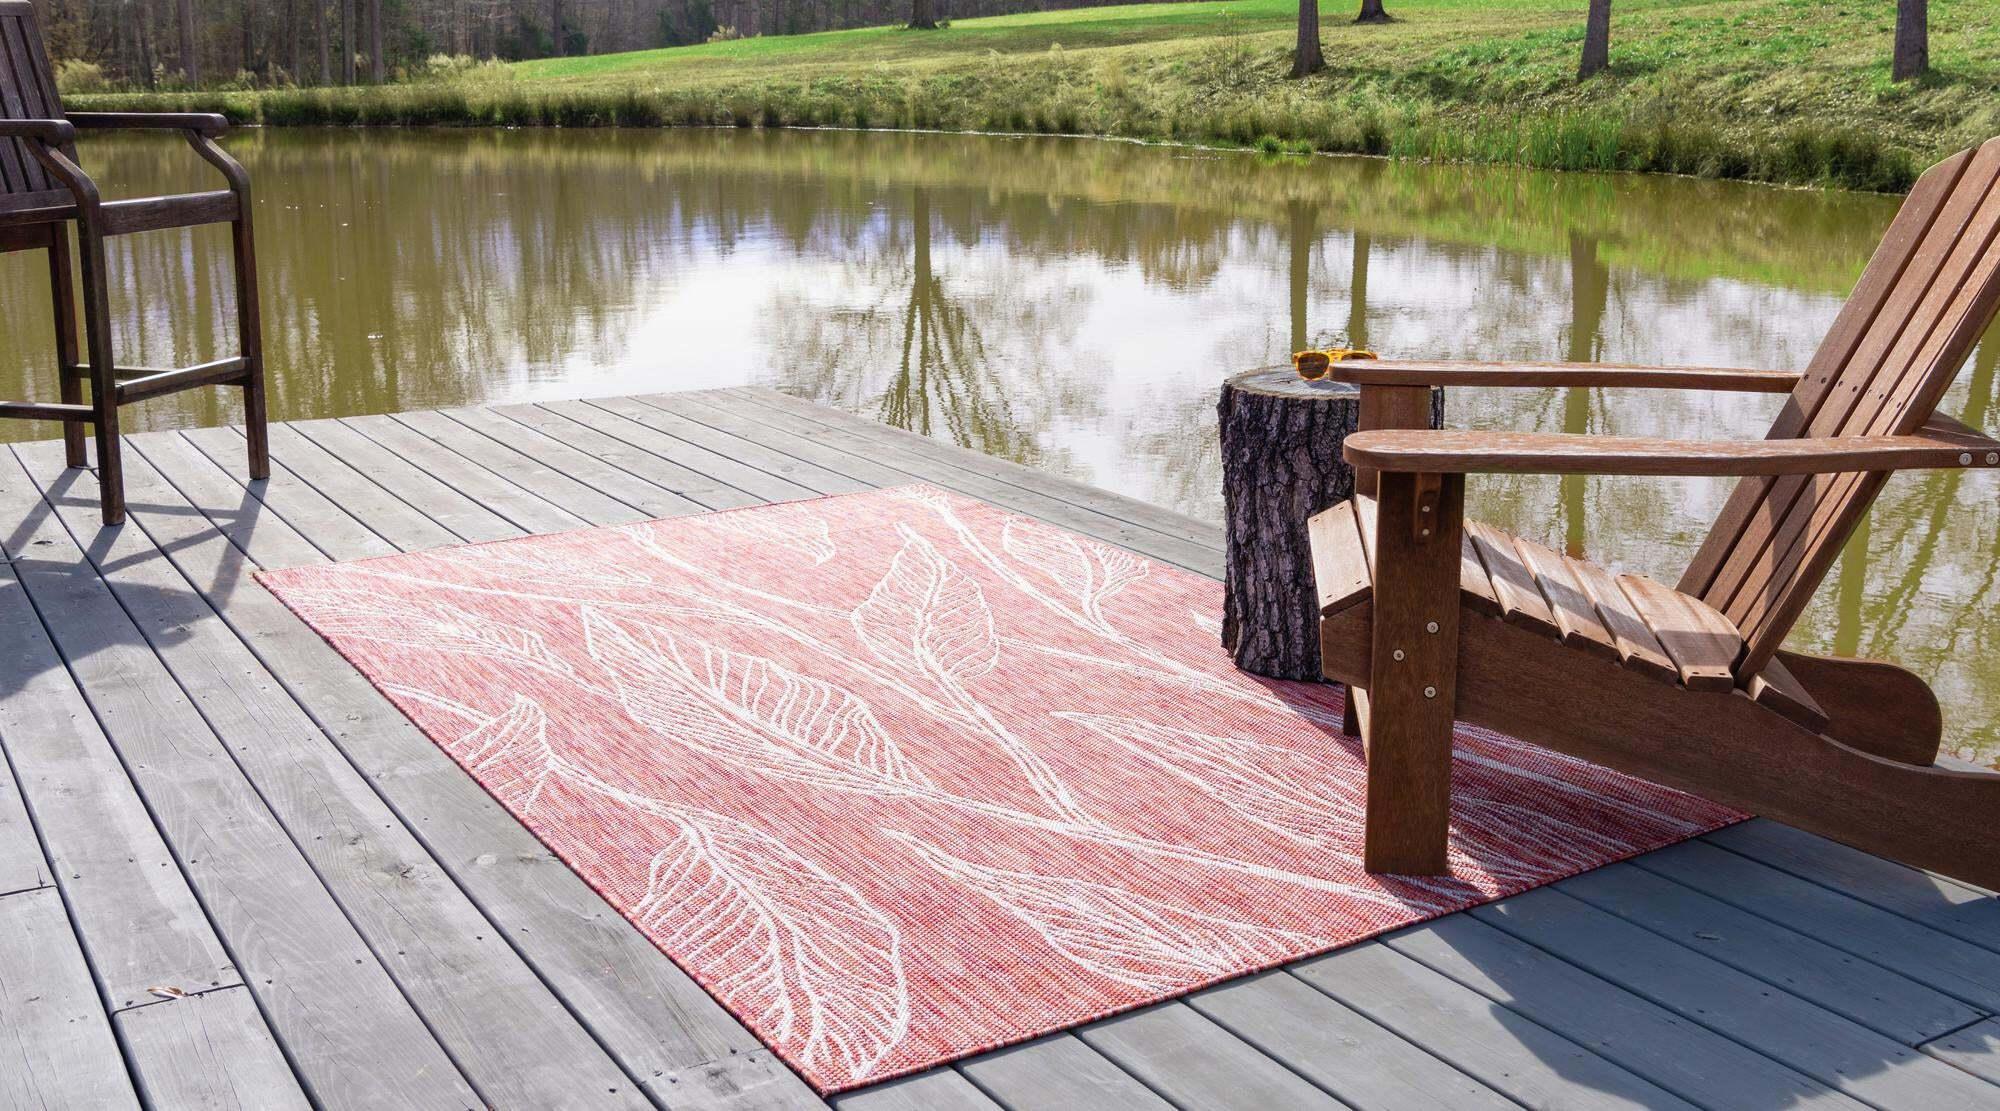 Unique Loom Outdoor Rugs - Outdoor Botanical Floral / Botanical Rectangular 8x11 Rug Rust Red & Gray